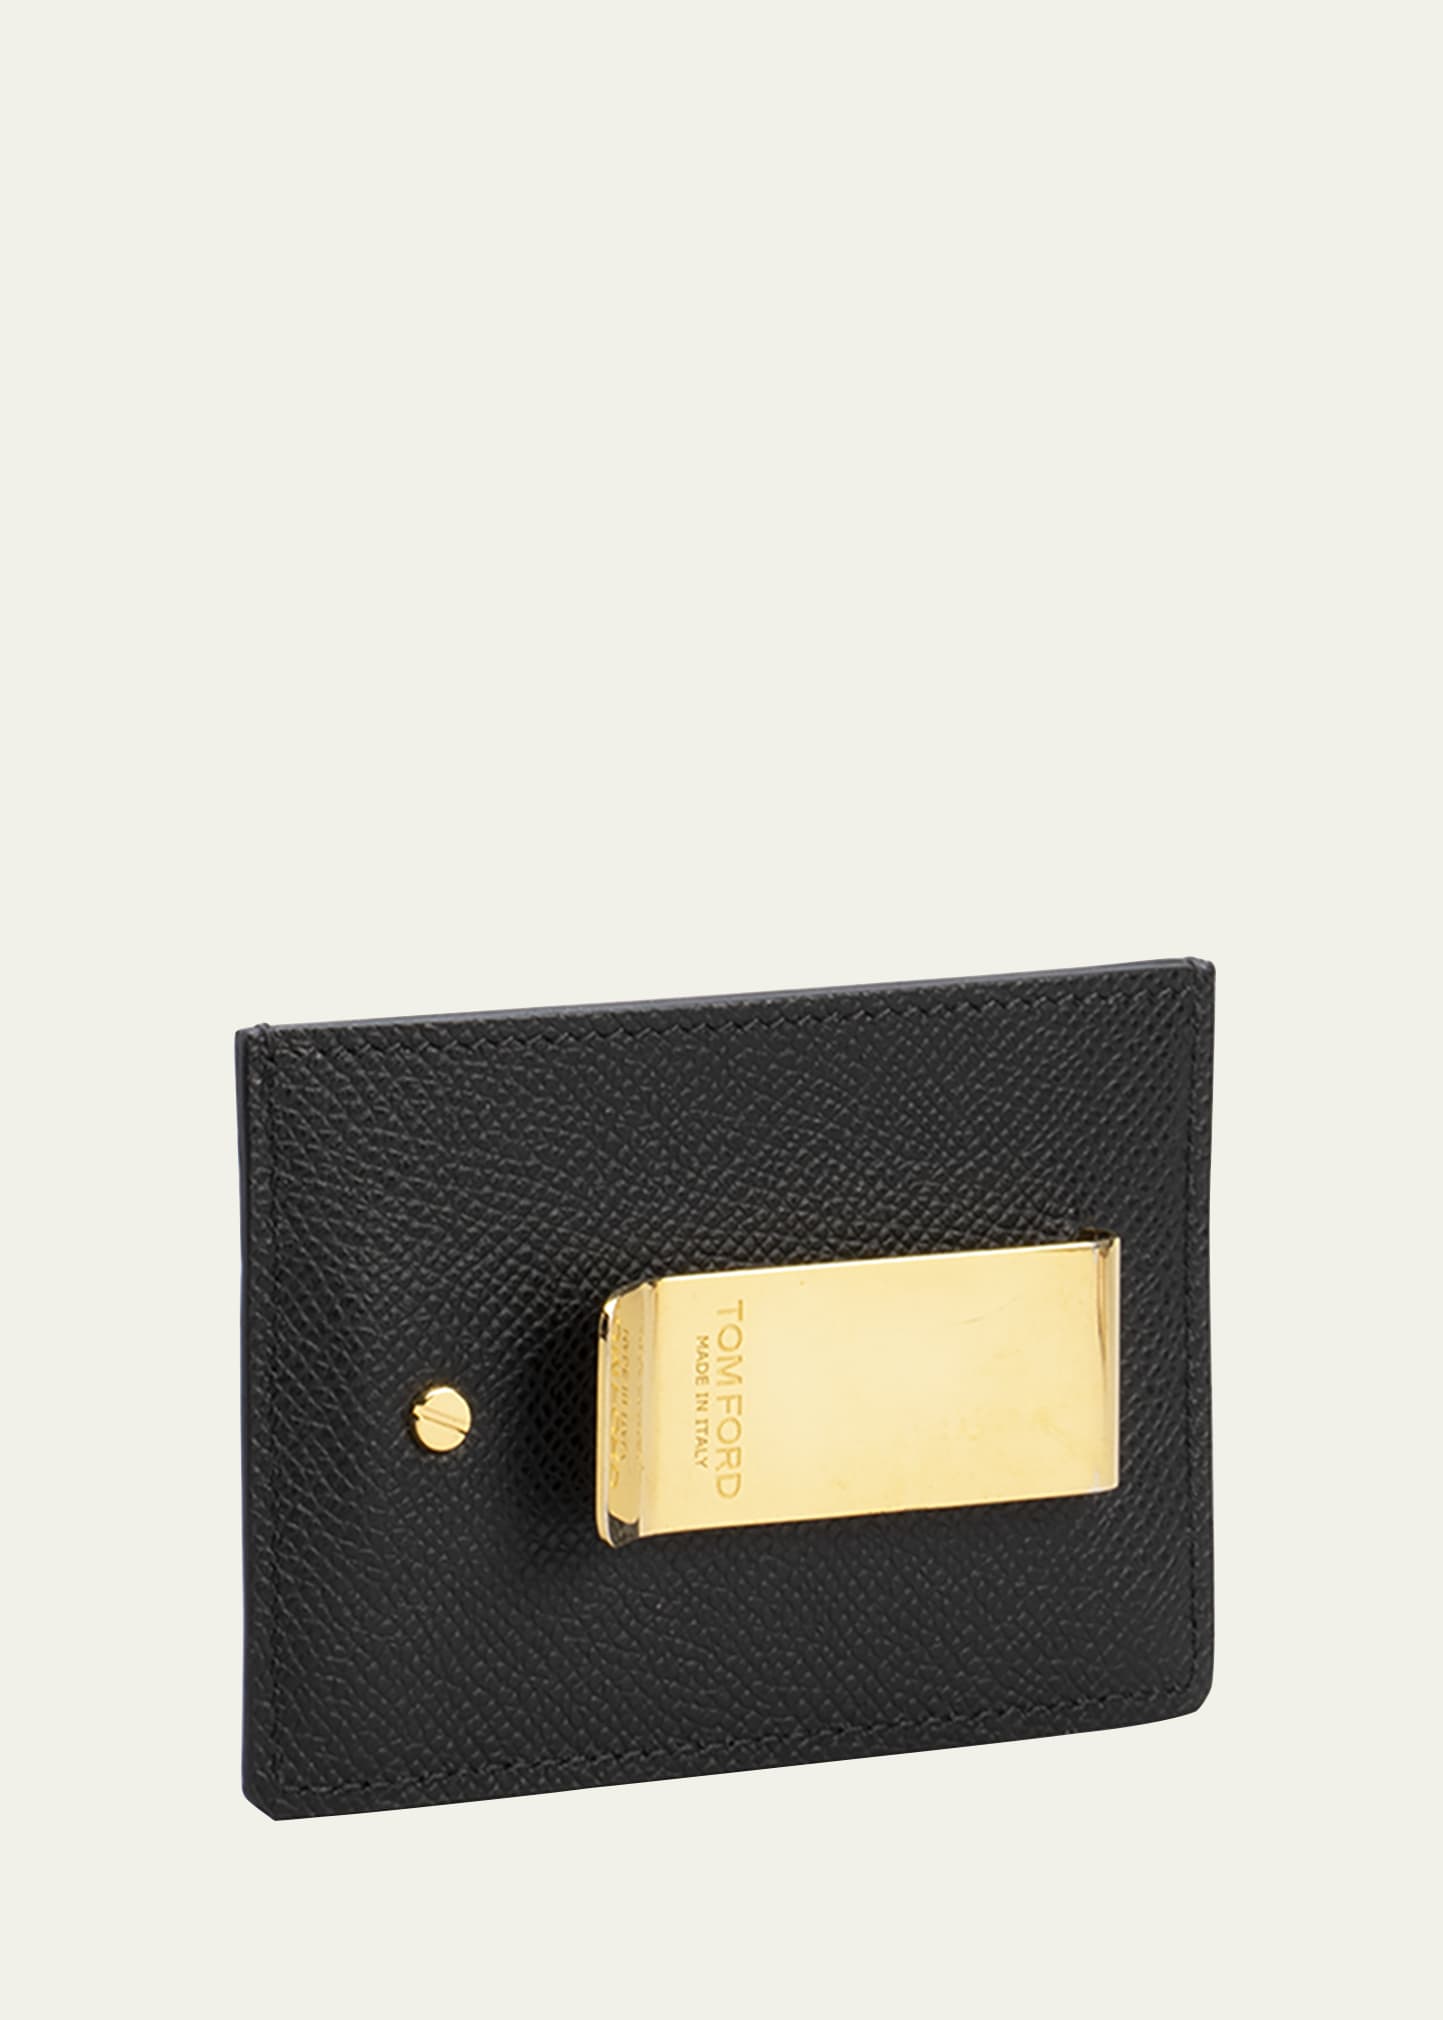 money clip leather wallet, TOM FORD